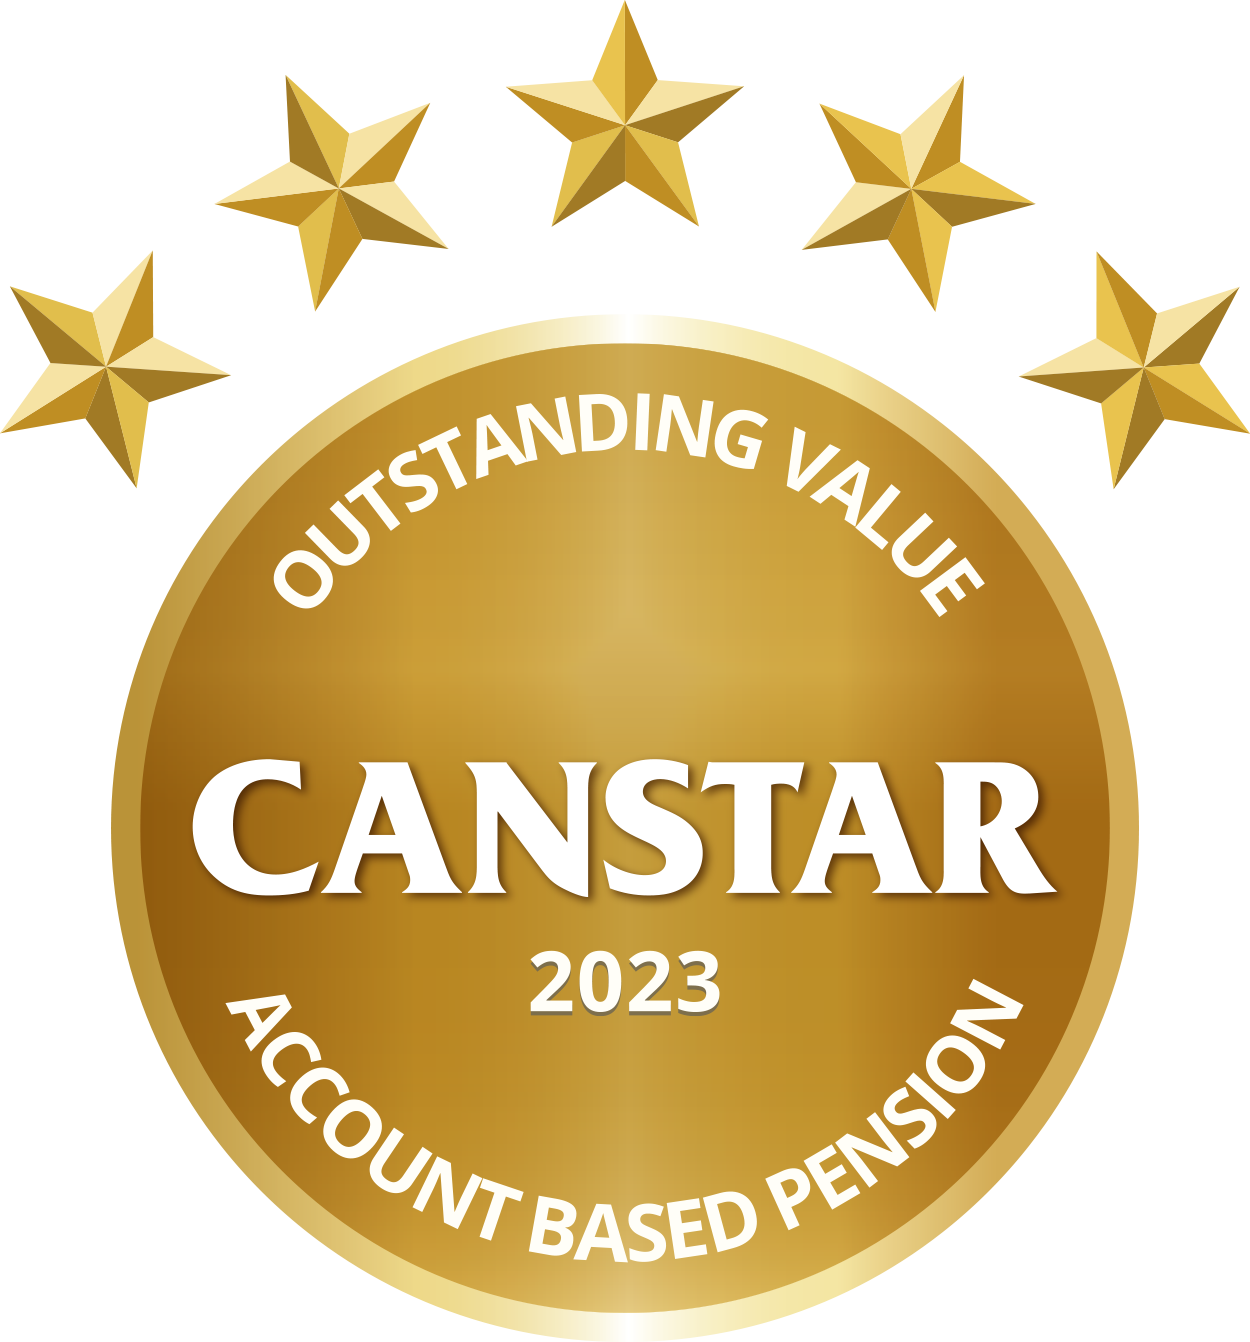 Canstar outstanding value 2022 account based pension award logo